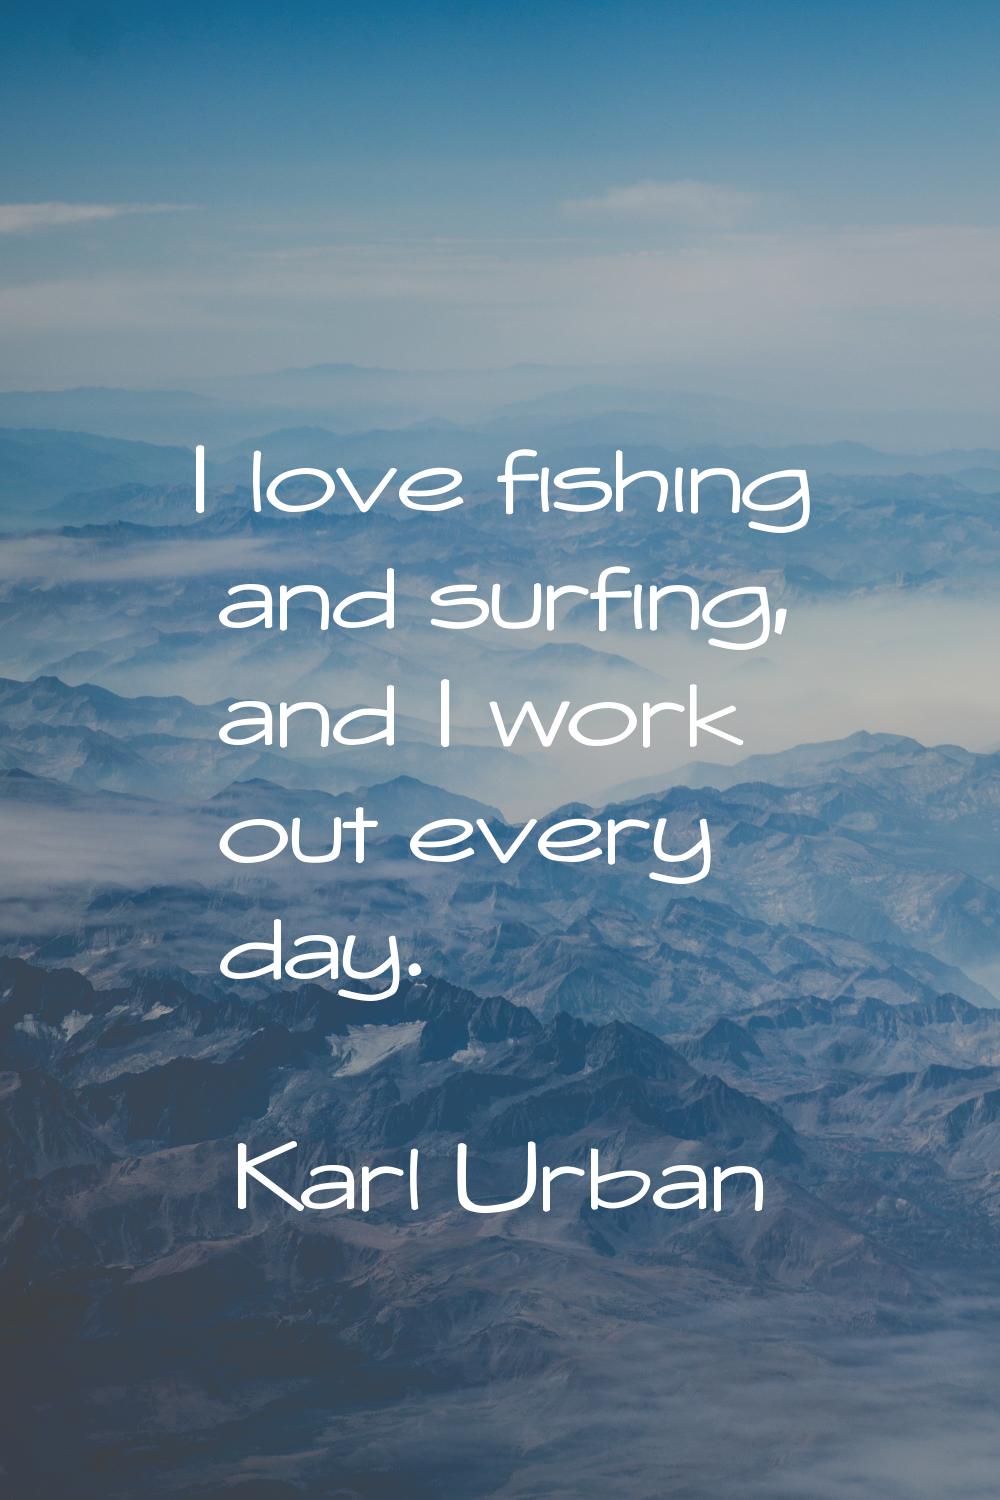 I love fishing and surfing, and I work out every day.